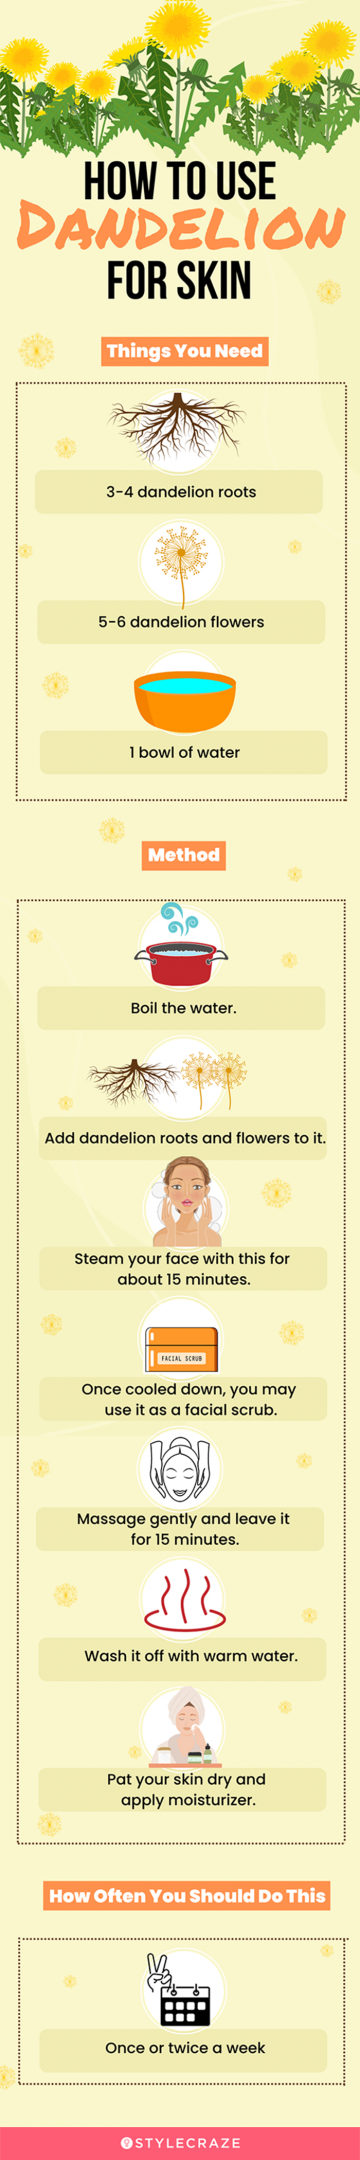 how to use dandelion for skin (infographic)